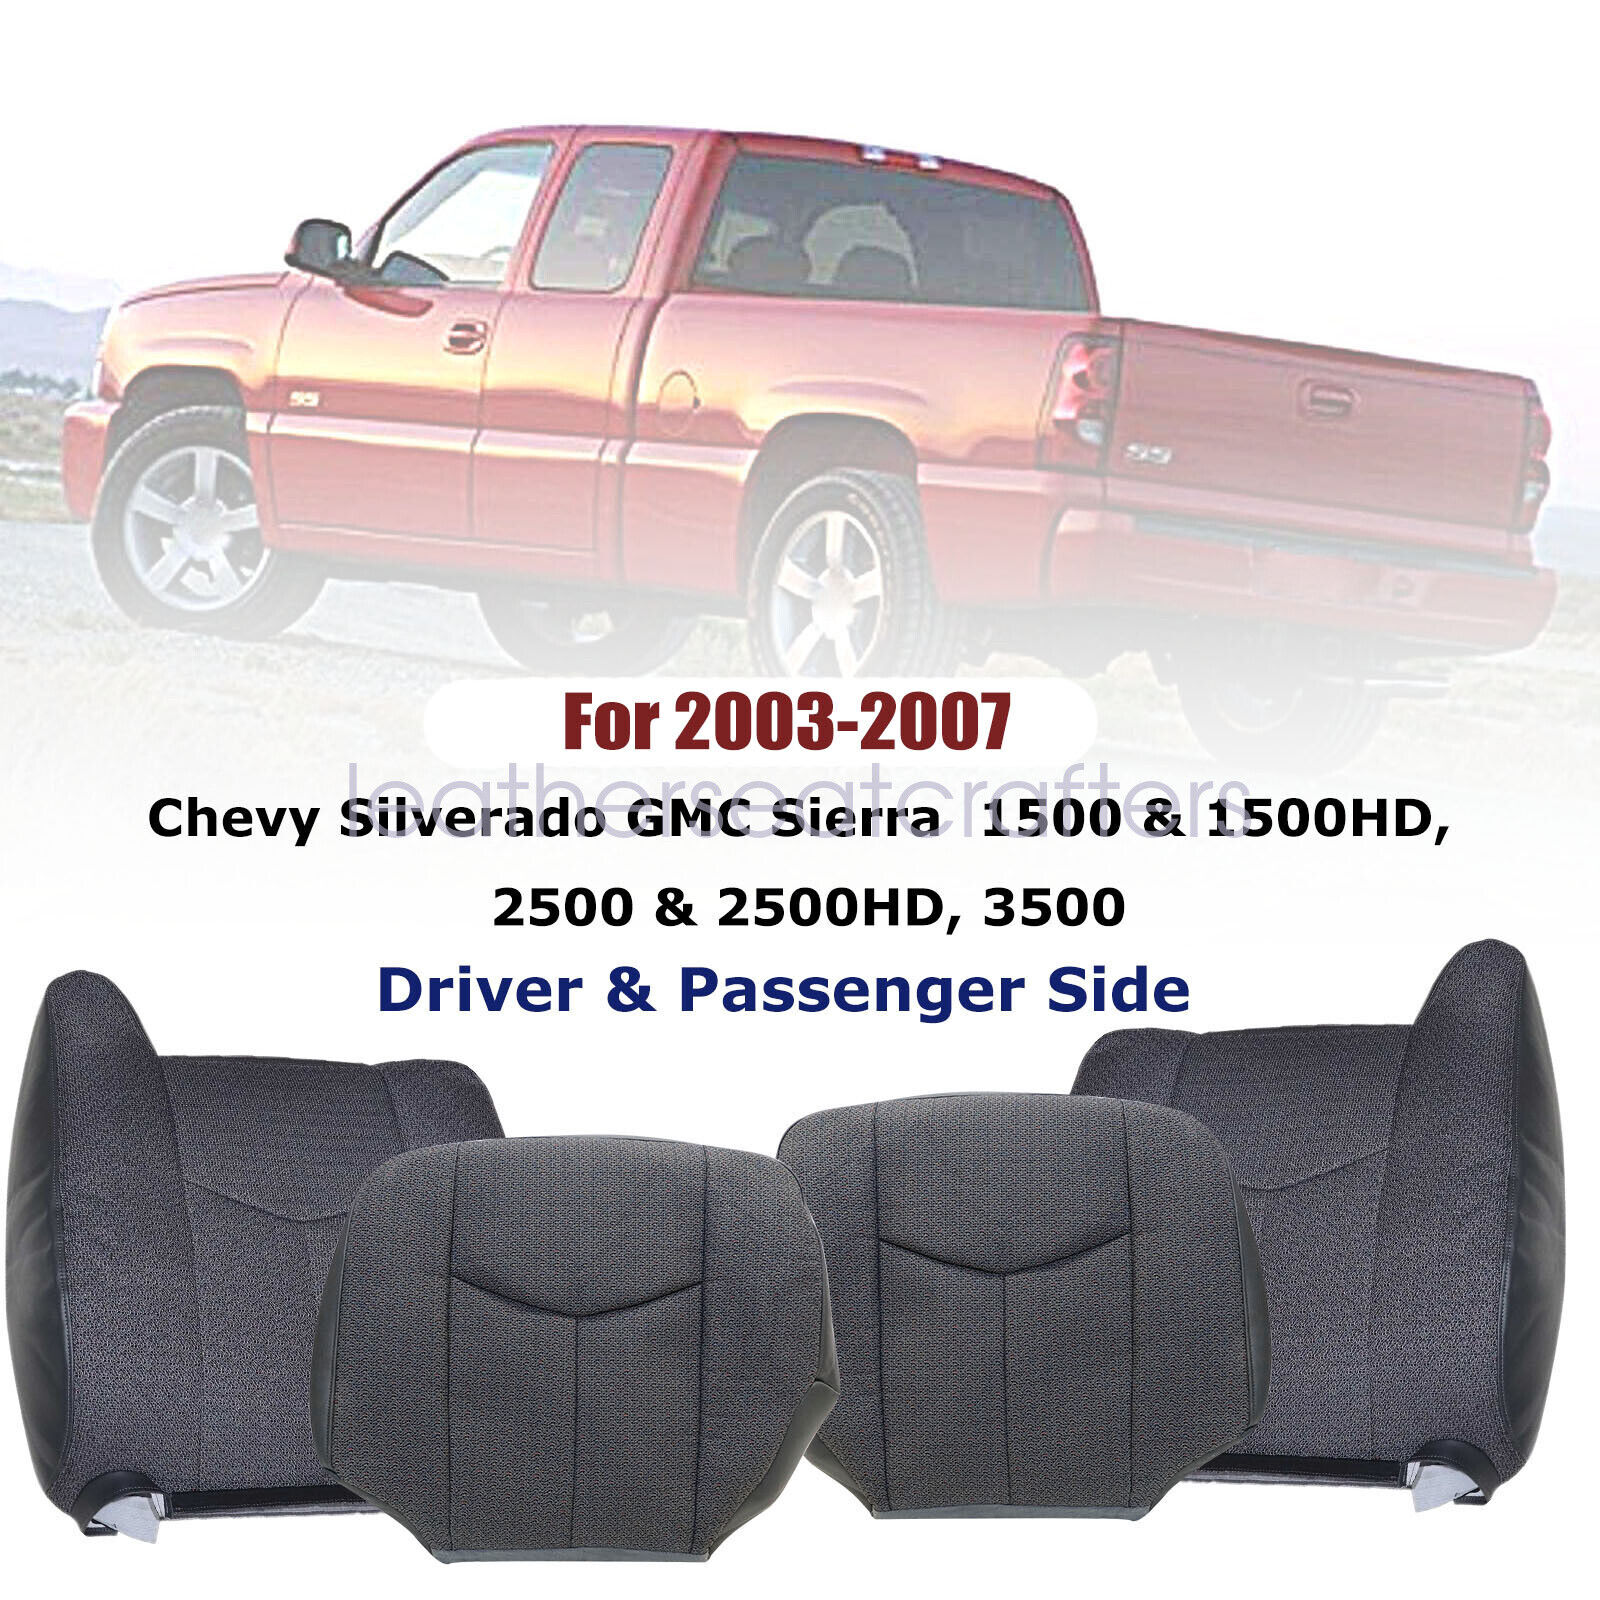 For 2003-2007 GMC Sierra 1500 2500 3500 Driver & Passenger Cloth Seat Cover Gray